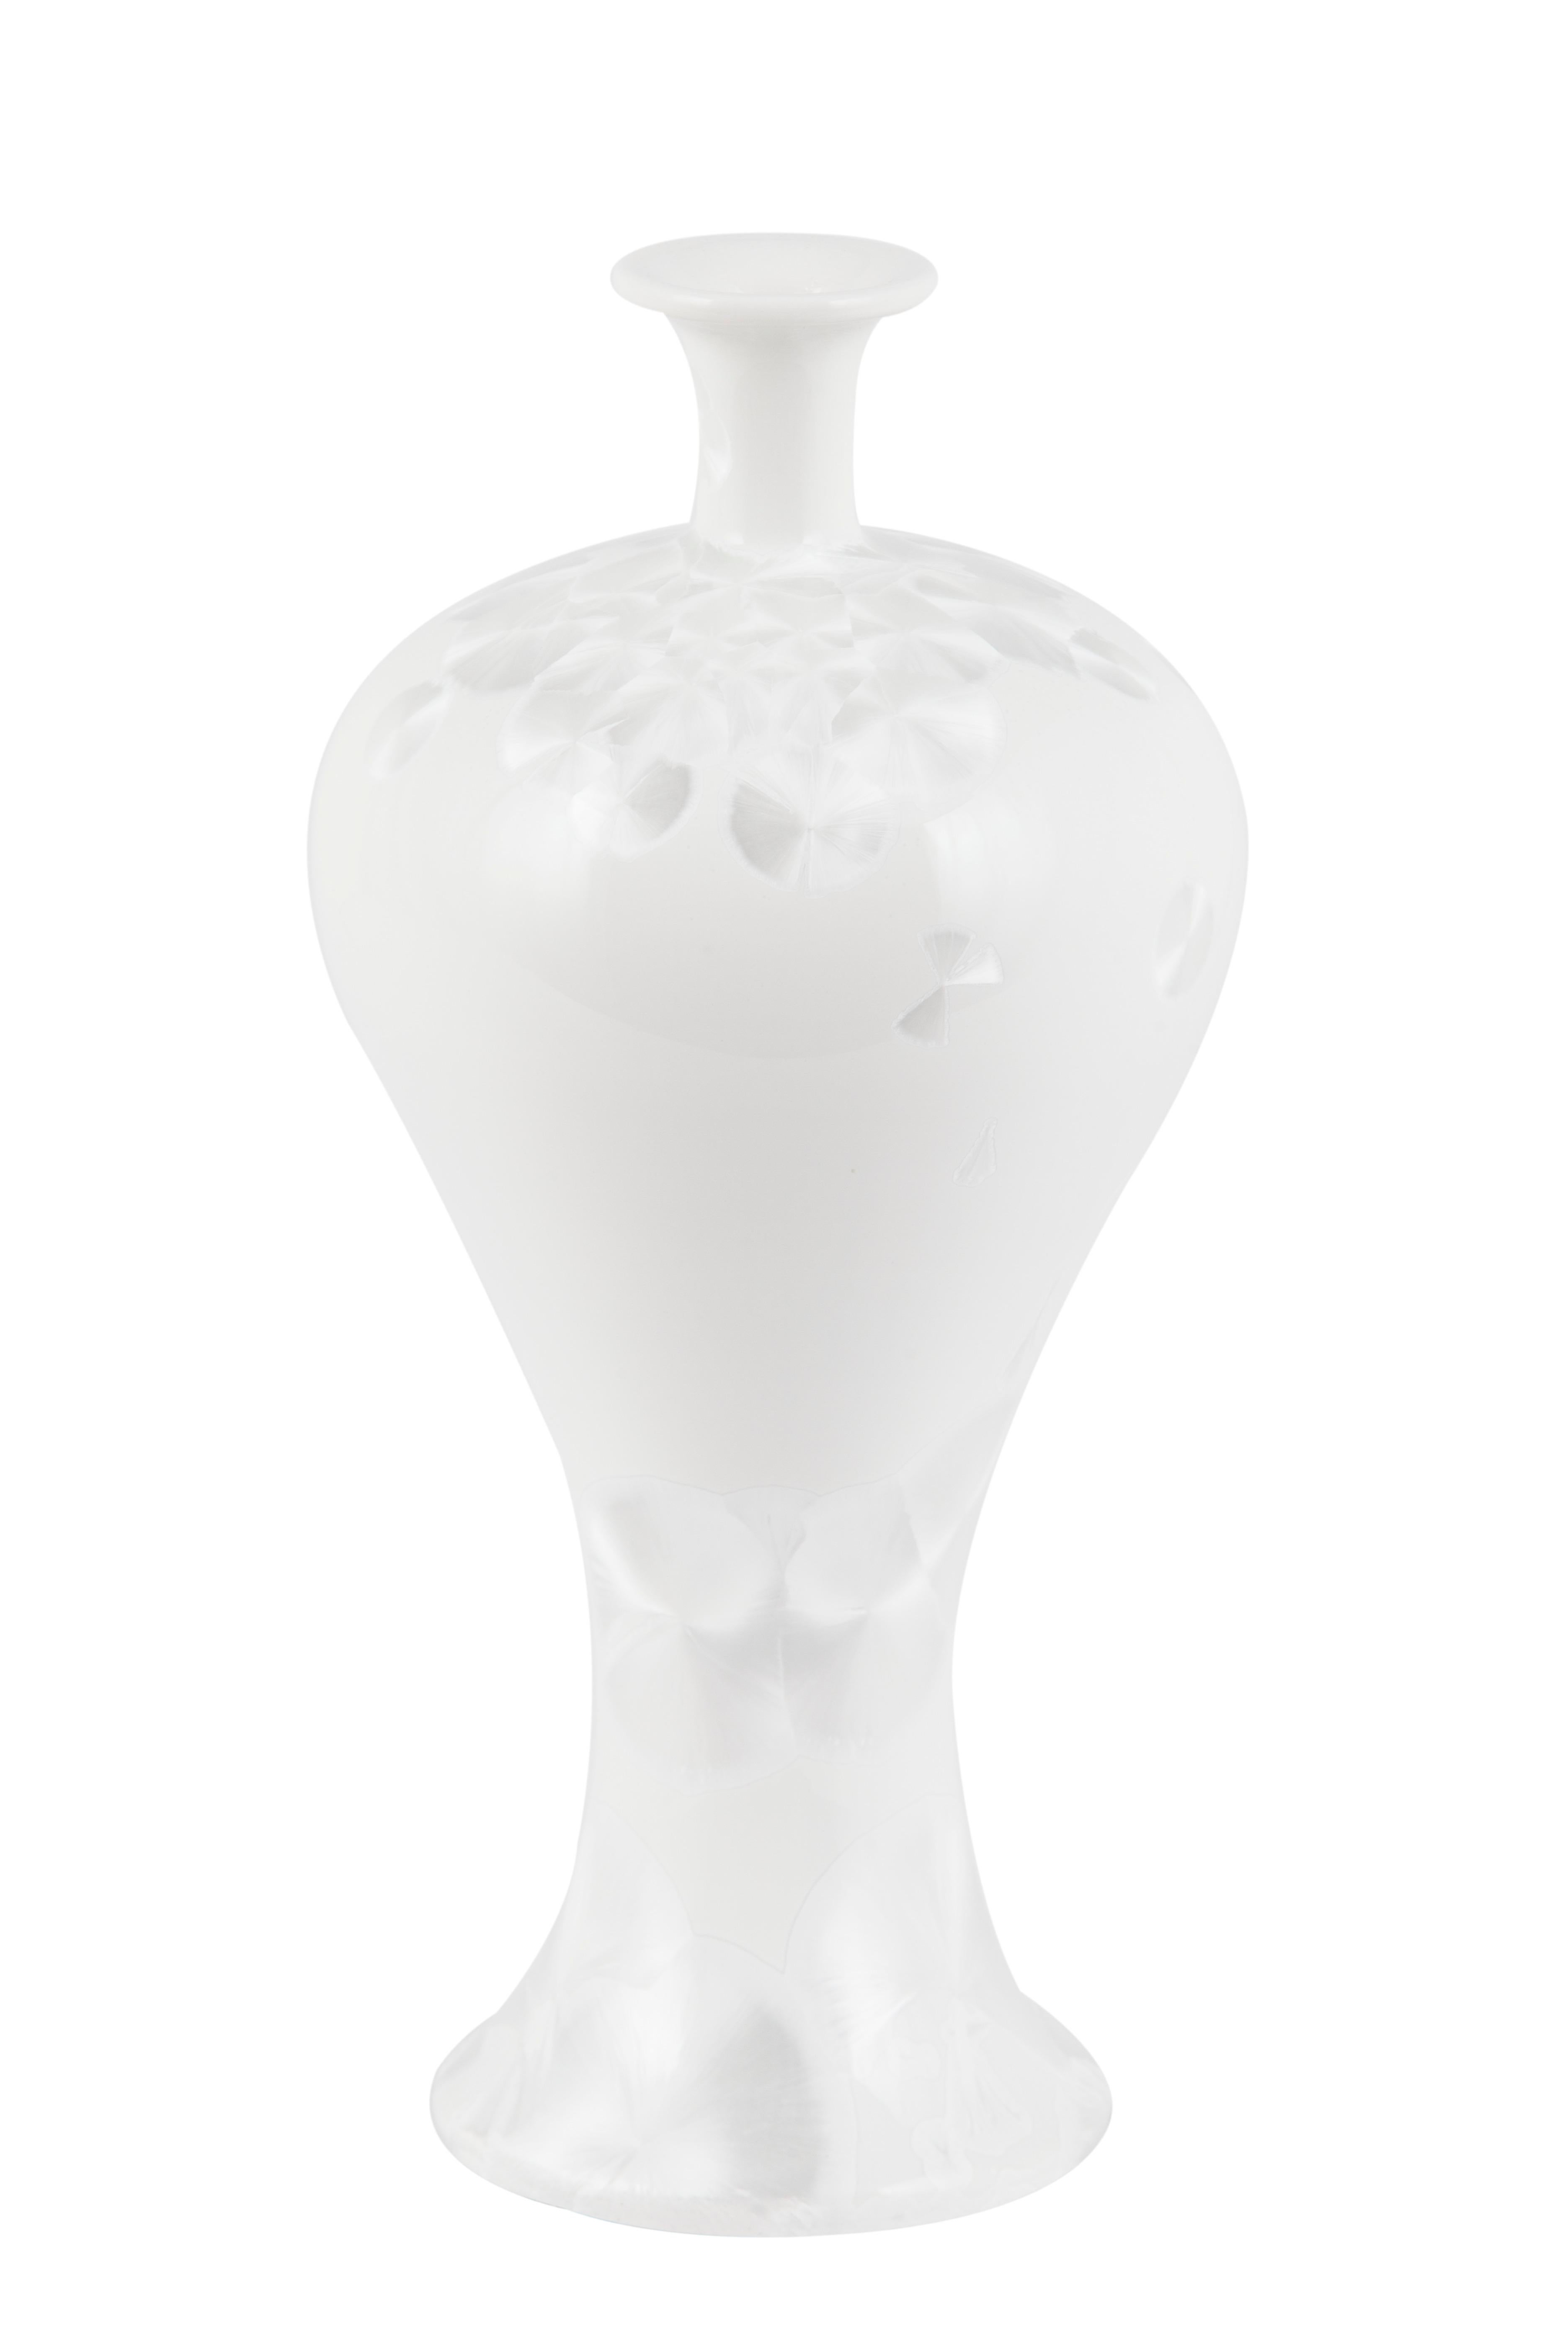 Contemporary Set/3 Porcelain Vases, DiaoChan Vases, White, Handmolded & Hand Decorated For Sale